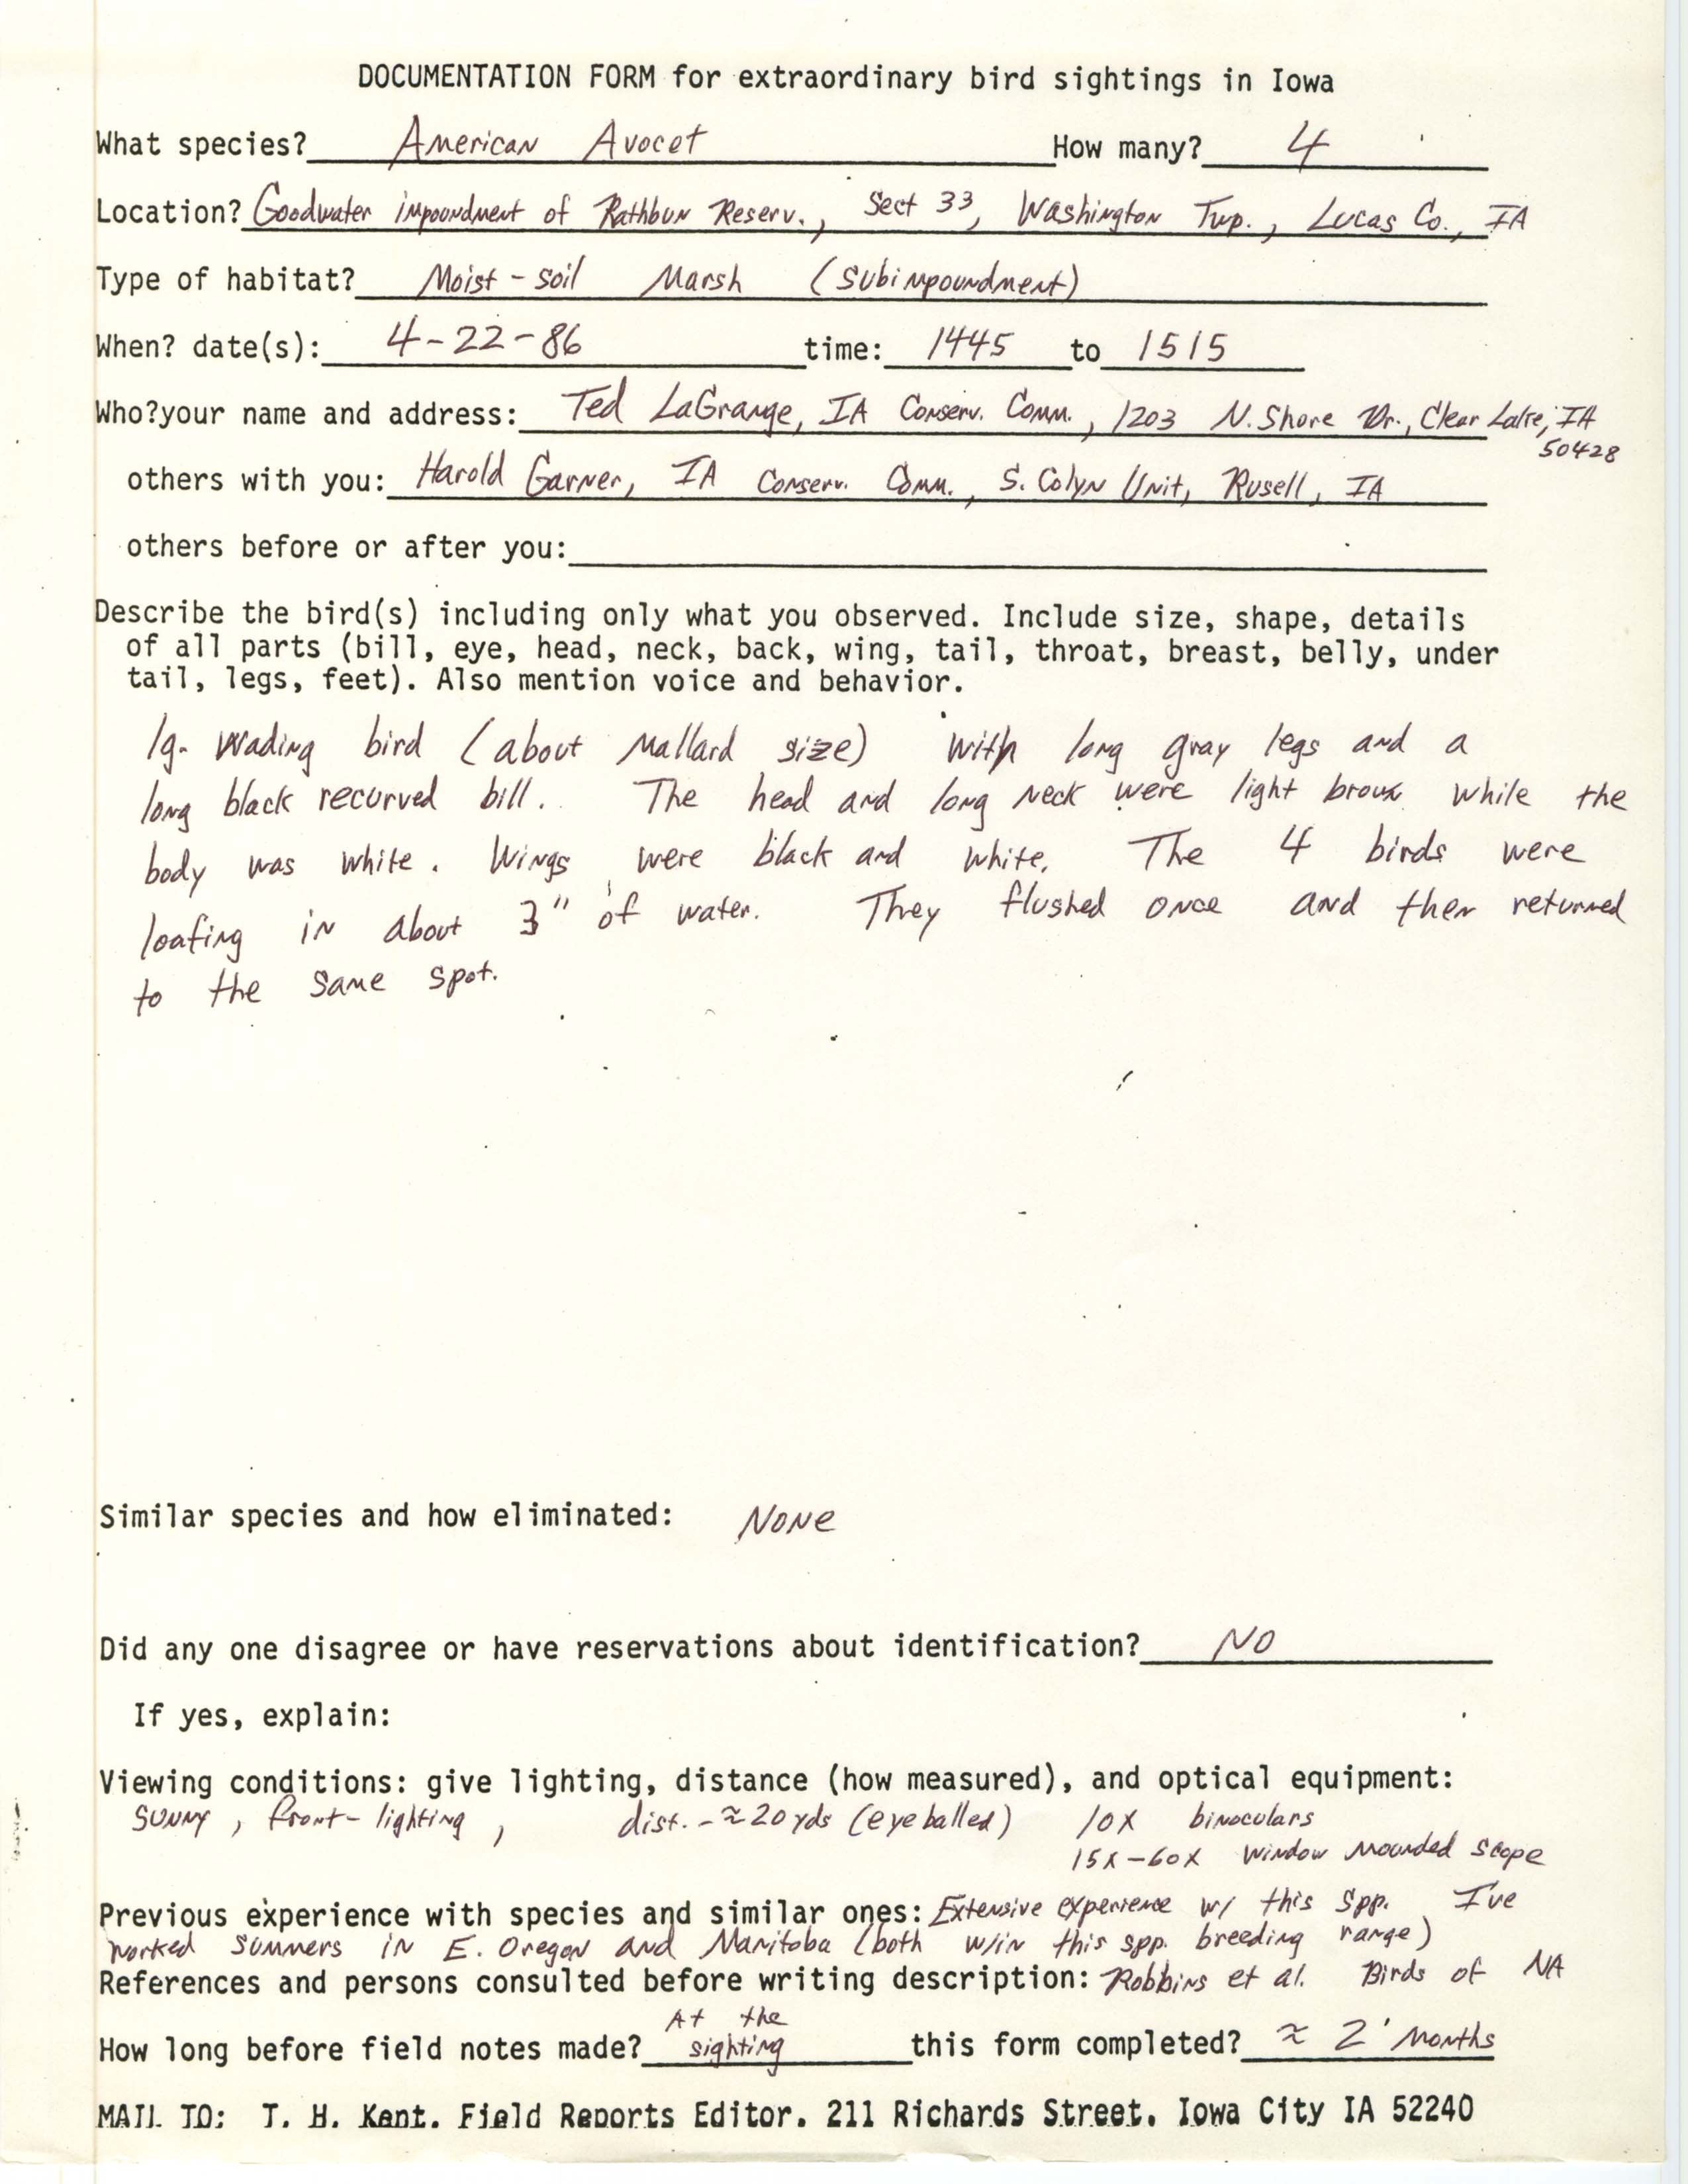 Rare bird documentation form for American Avocet at Goodwater Impoundment at Rathbun Reserve, 1986